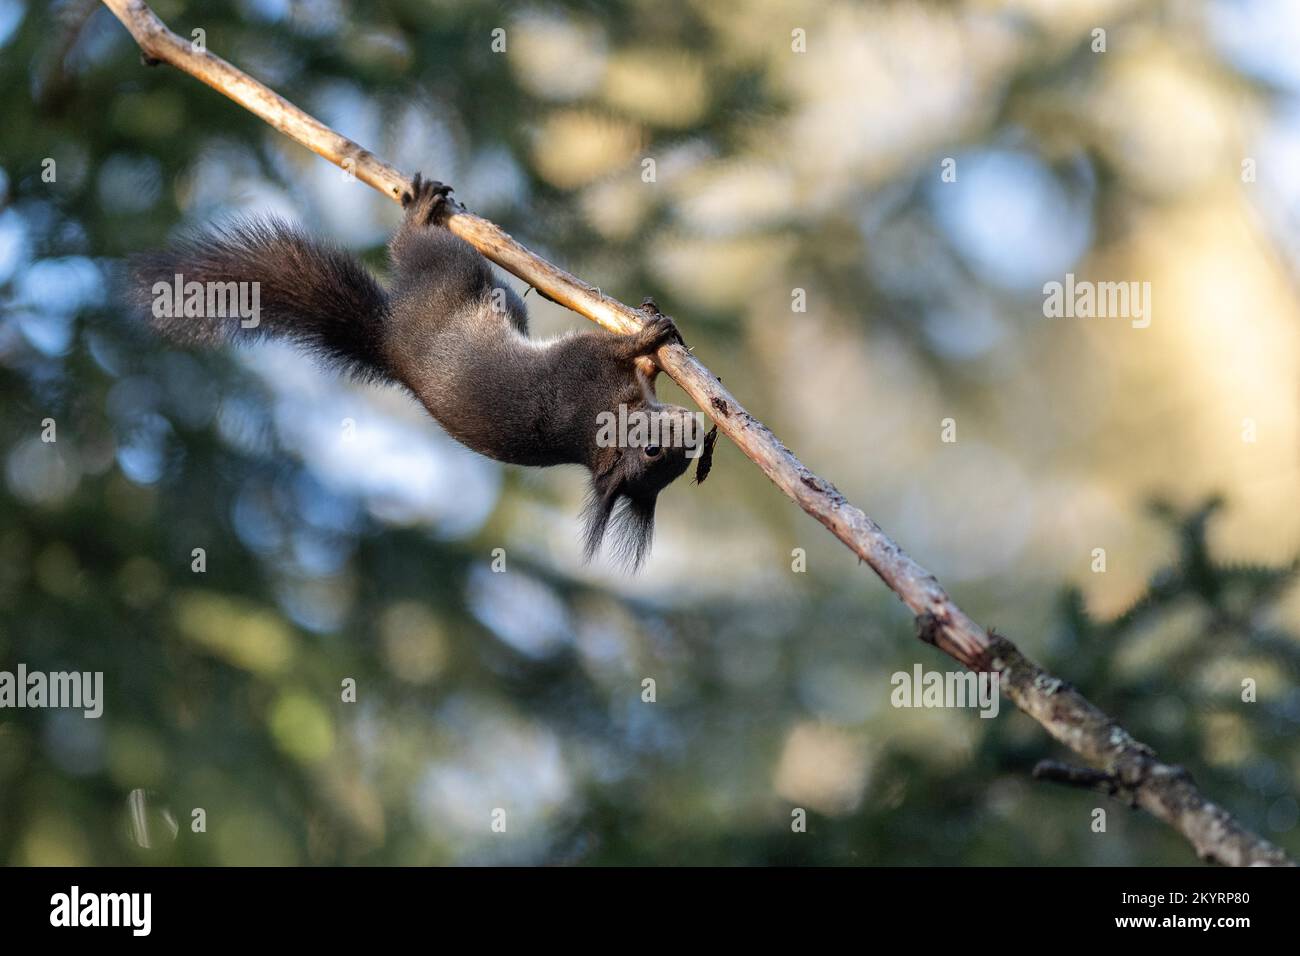 Squirrel (Sciurus) hanging upside down from a branch, Arosa, Canton Grisons, Switzerland, Europe Stock Photo